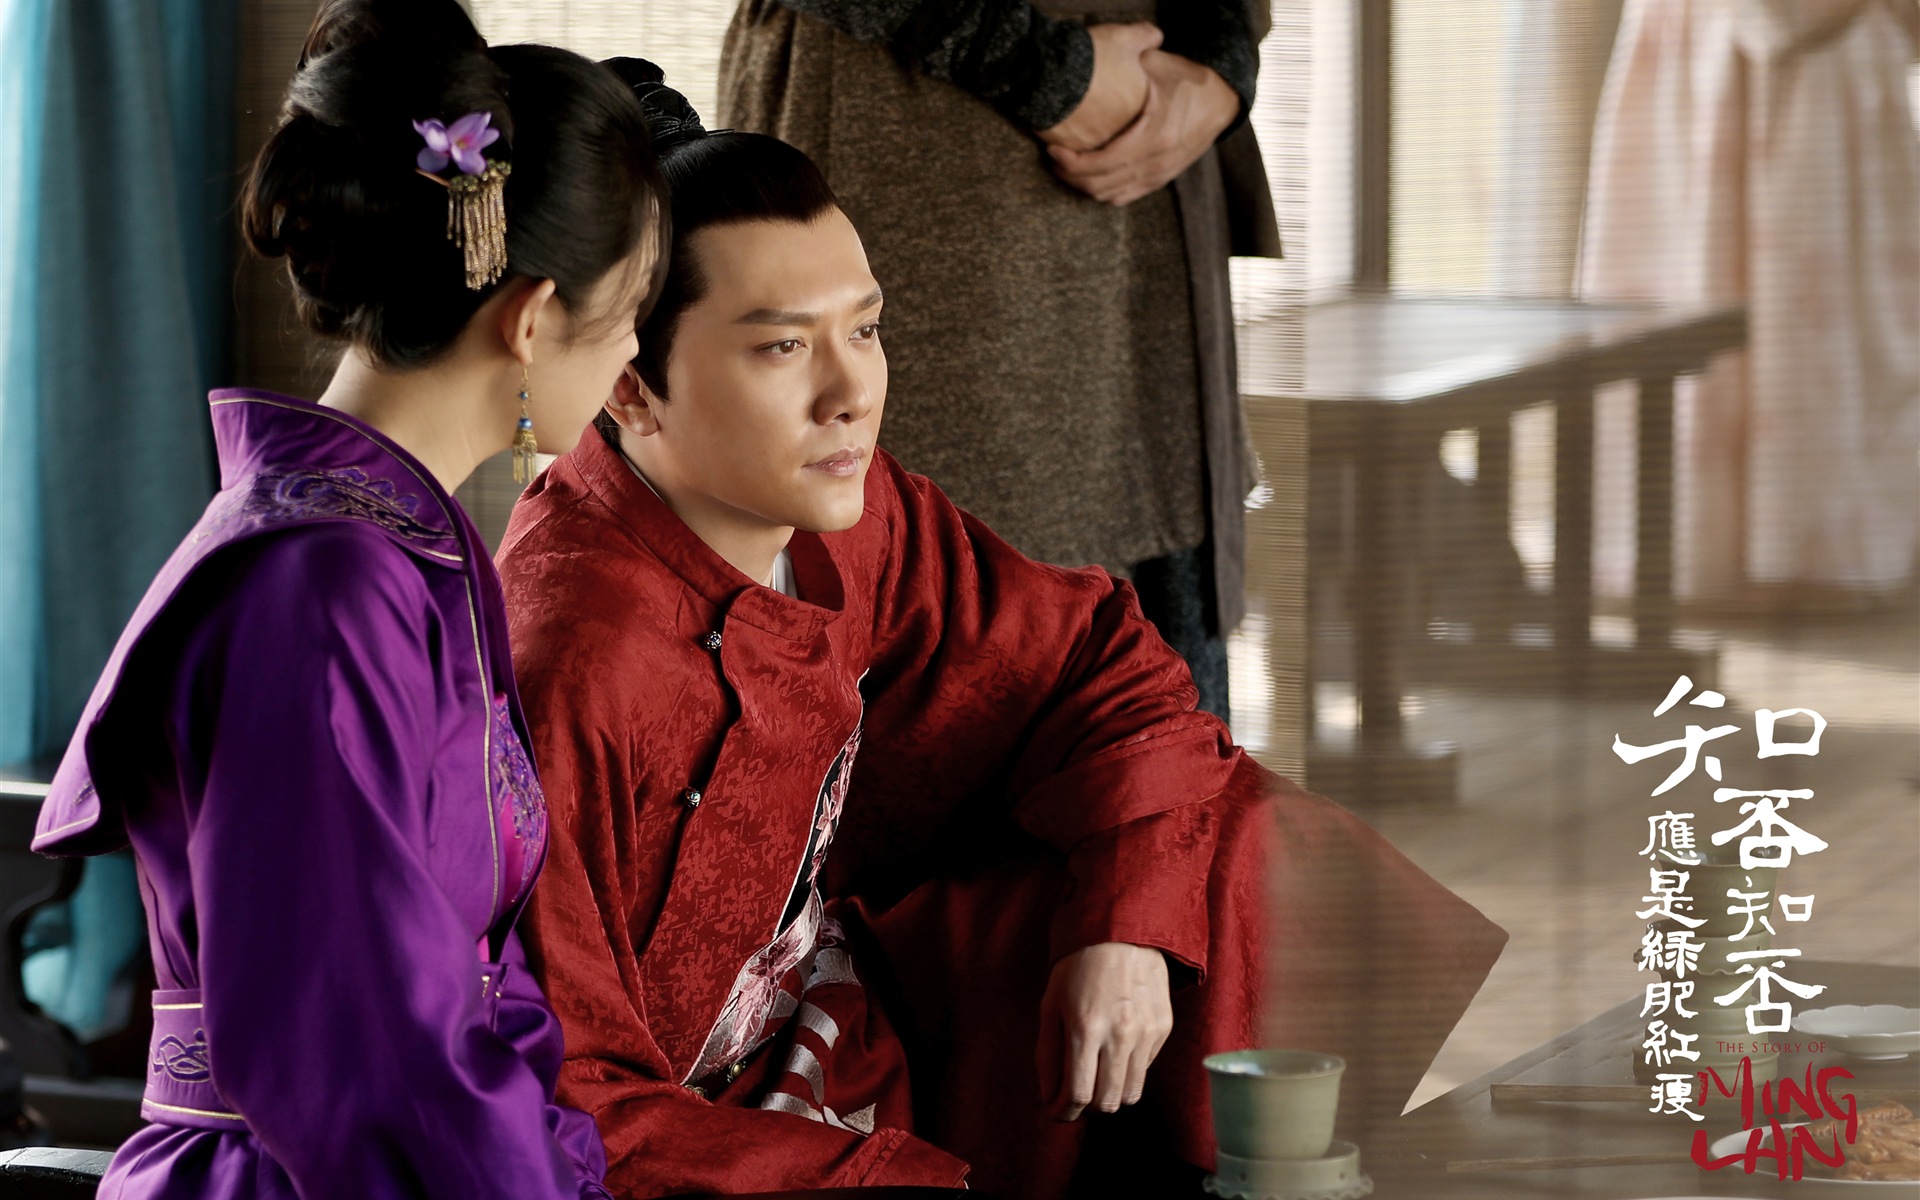 The Story Of MingLan, TV series HD wallpapers #42 - 1920x1200